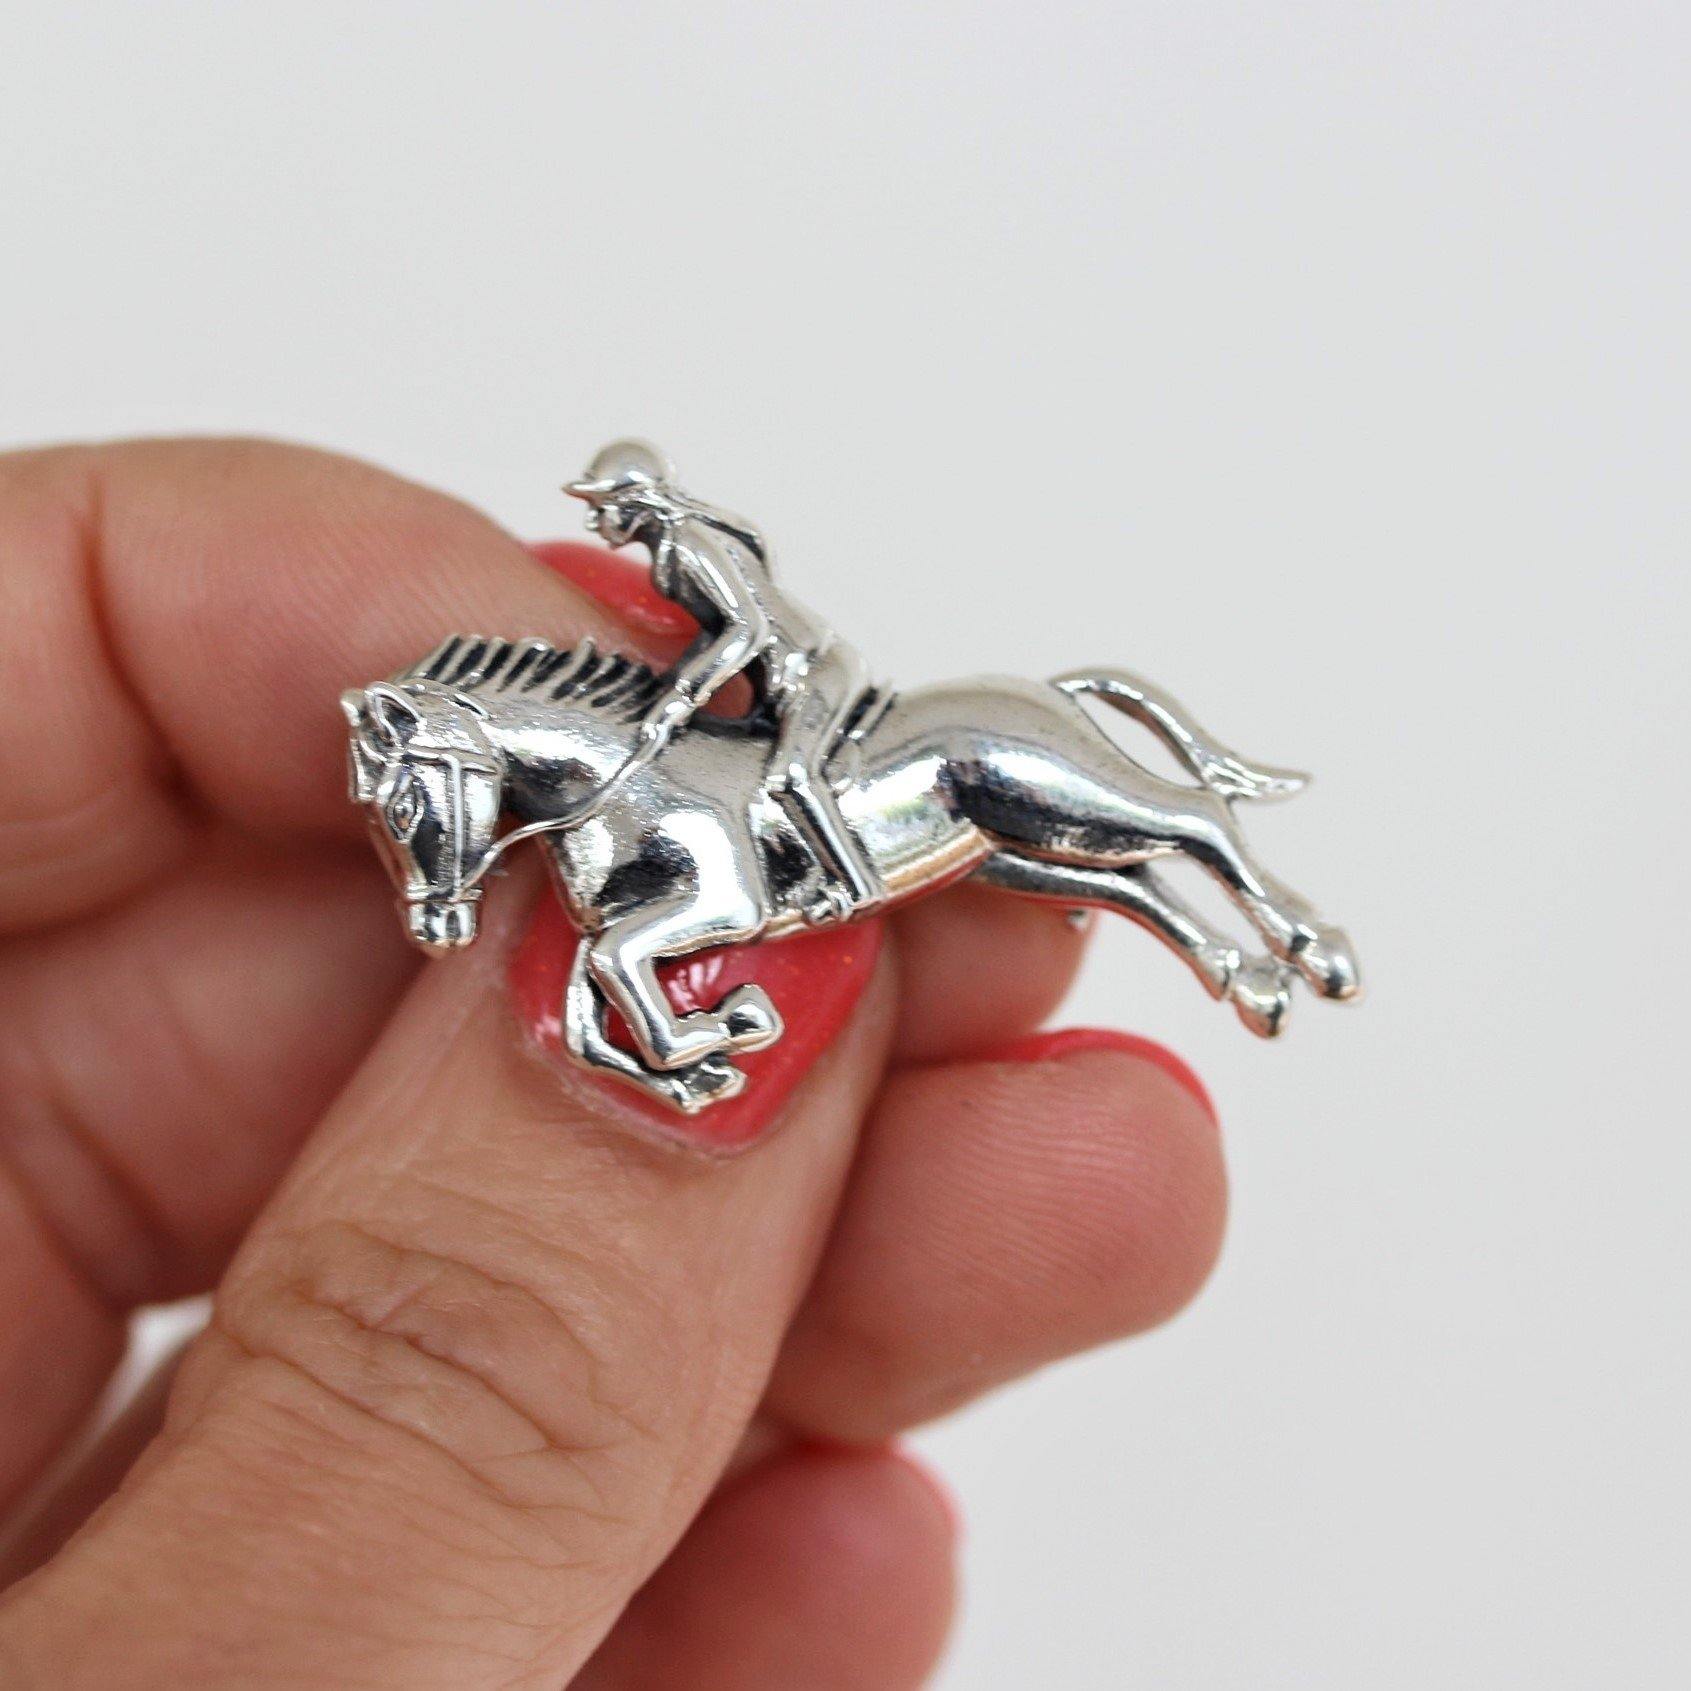 Sterling Silver Girl Lady Riding Jumping Horse Brooch Pin Equestrian - STERLING SILVER DESIGNS